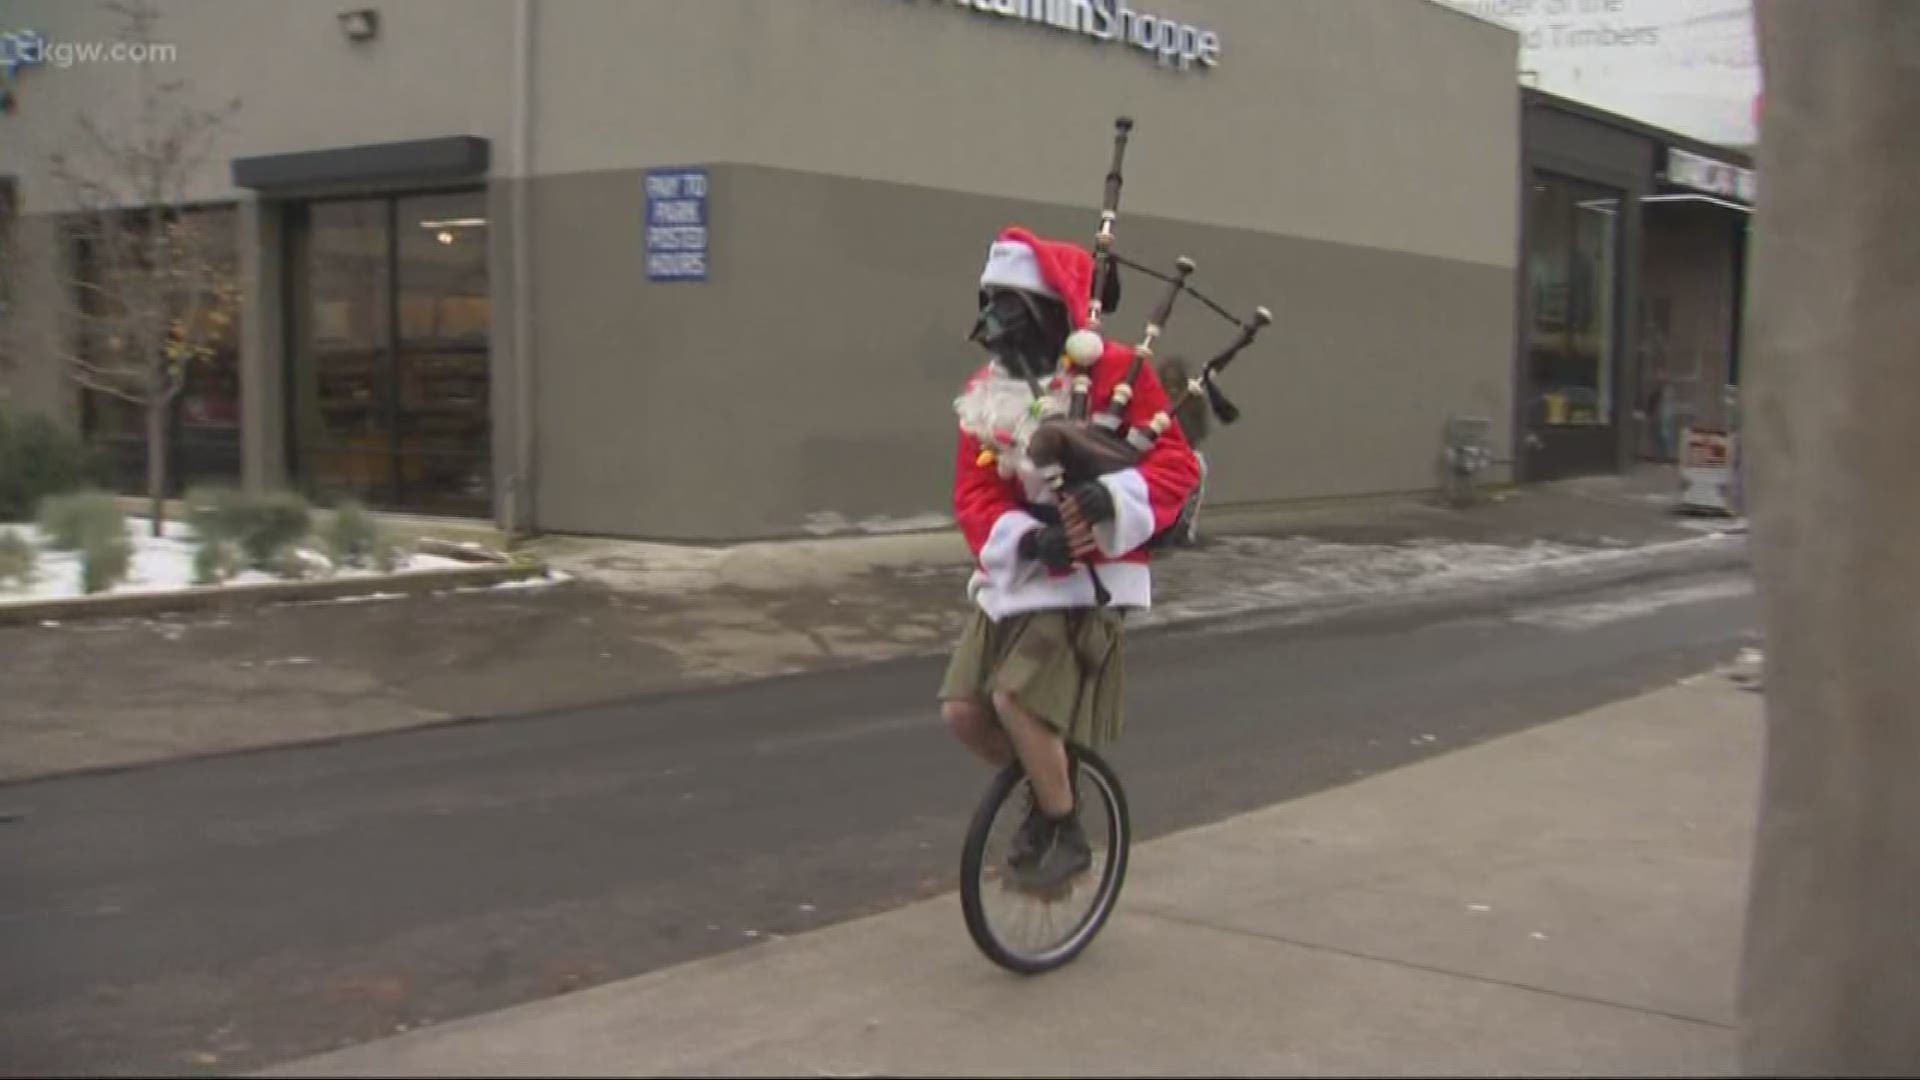 Portland's "Unipiper" gets ready for weekend Pop-Up Shop 